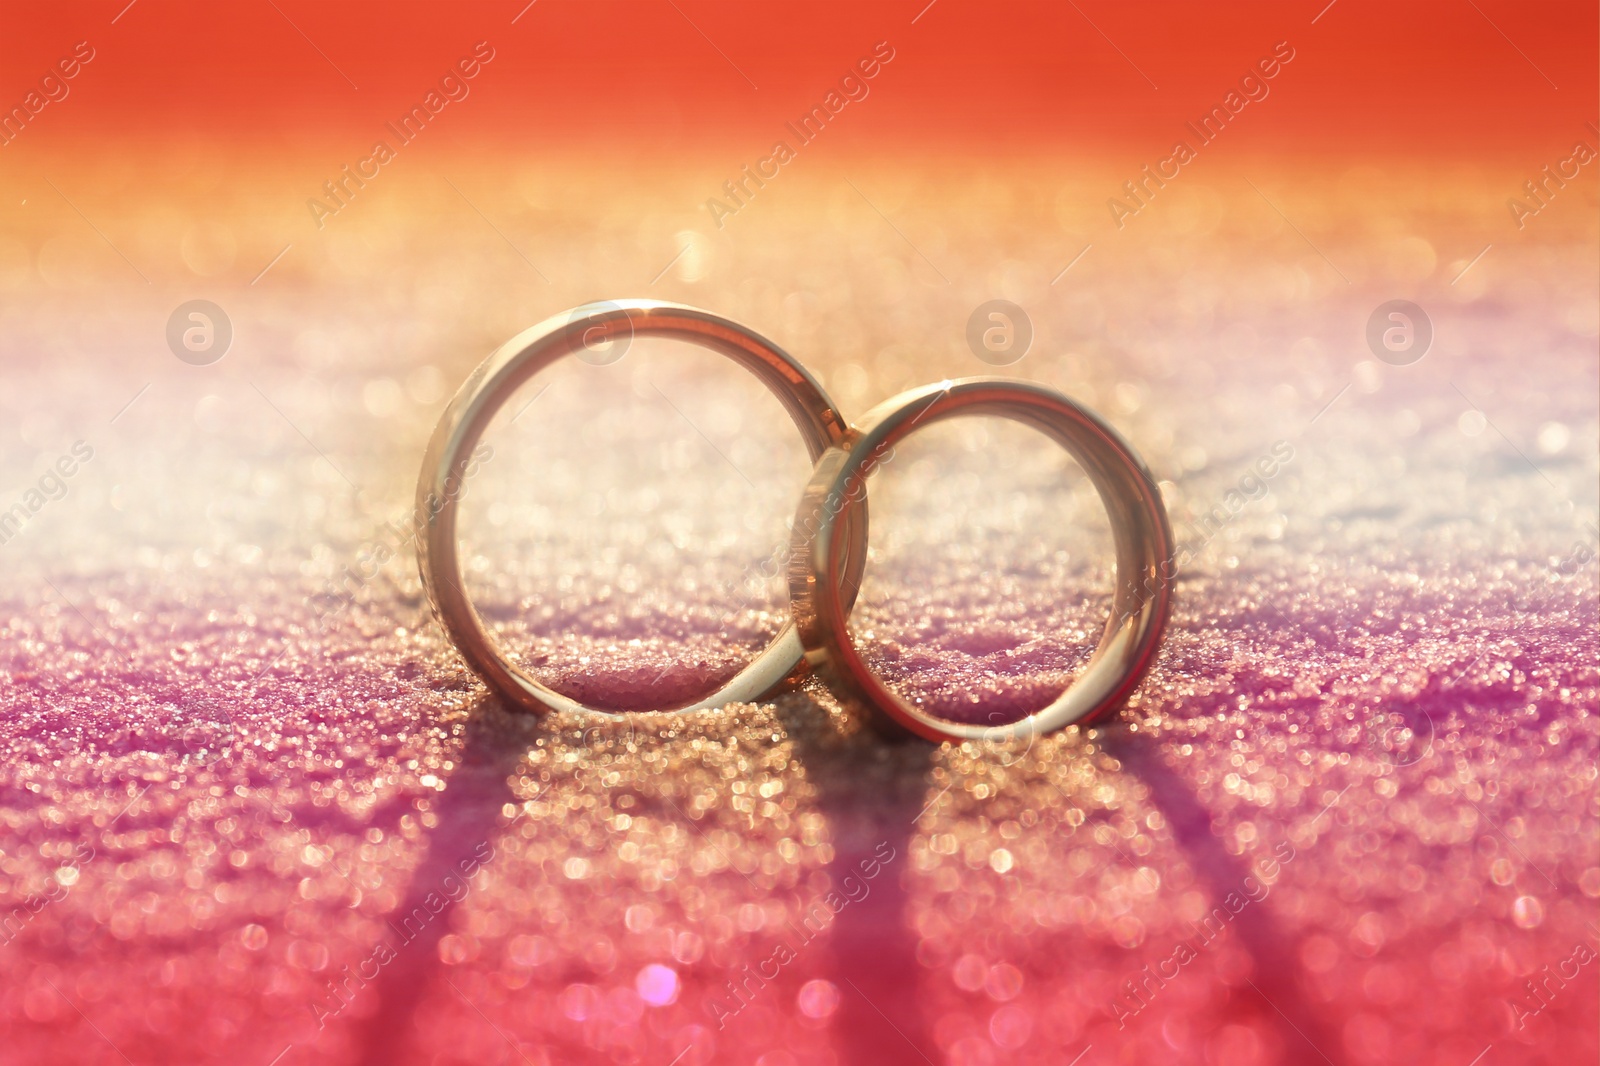 Image of Double exposure of lesbian flag and wedding rings on sandy beach, closeup